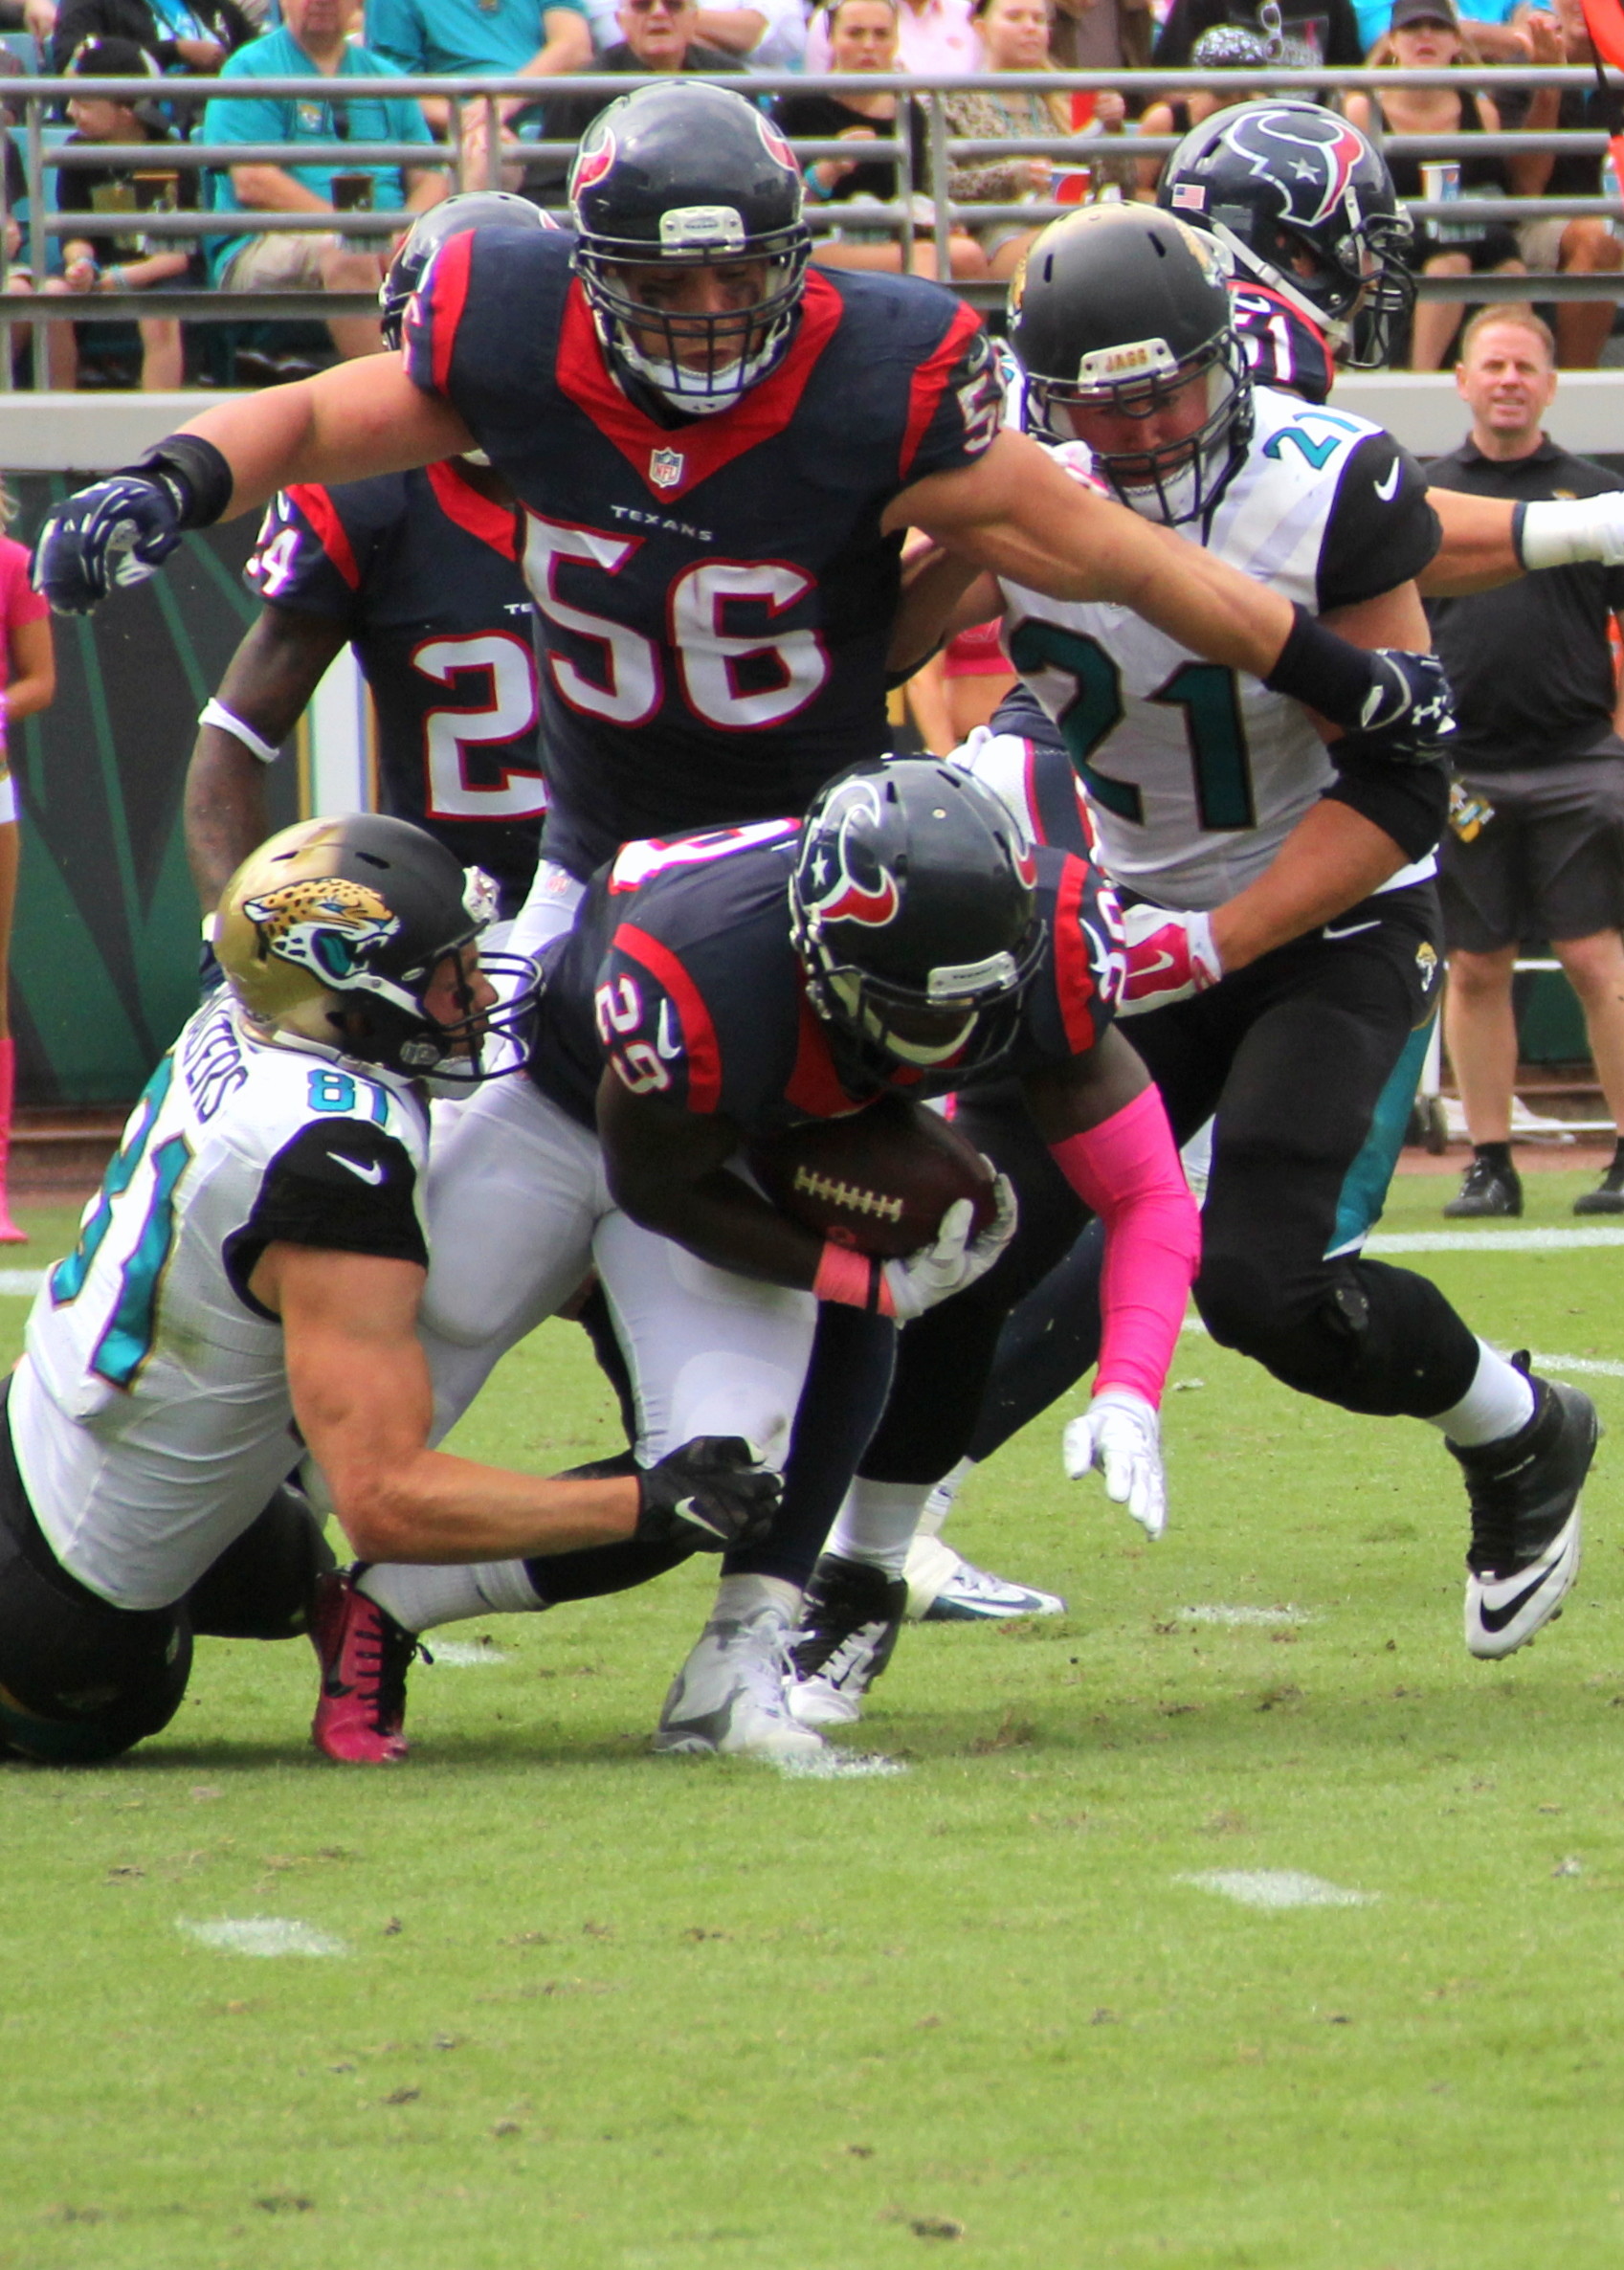 Houston defensive back Andre Hal, No. 29, out of Vanderbilt, had two of interceptions against the Jaguars. He ran one back for a 41-yard TD in the Texans 31-20 win.